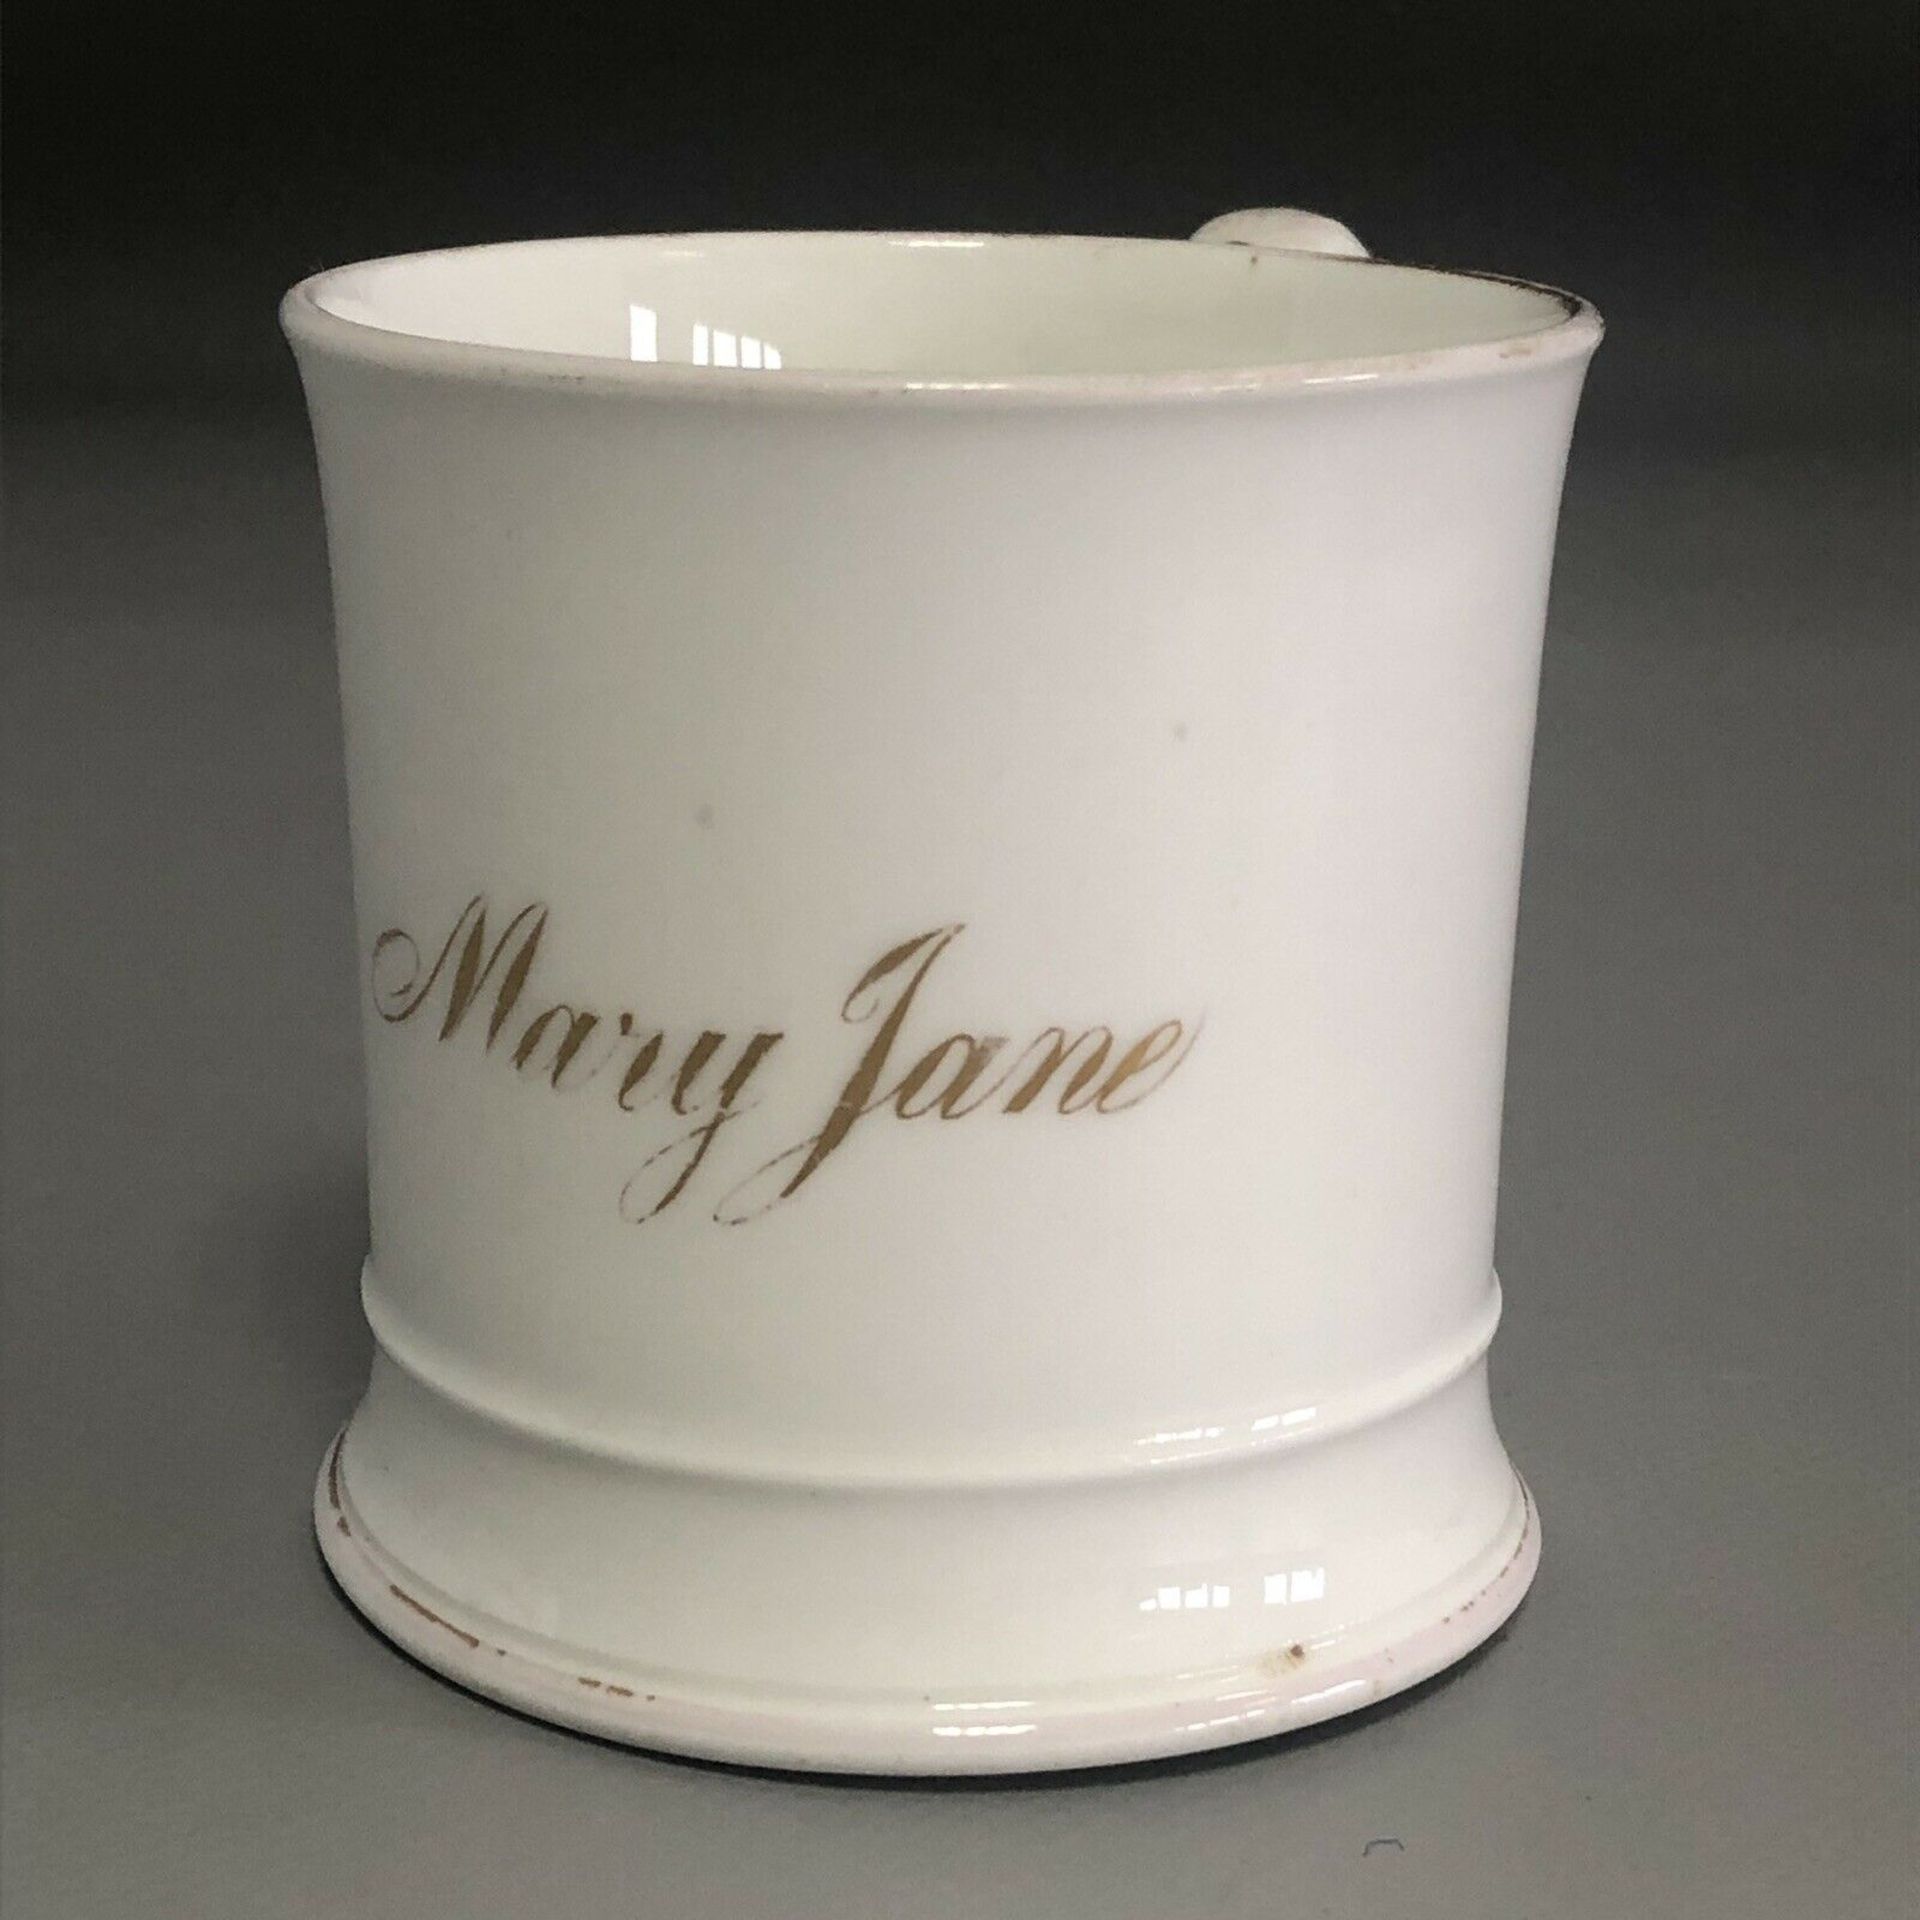 Antique 19th Century white porcelain child's tankard cup - named MARY JANE